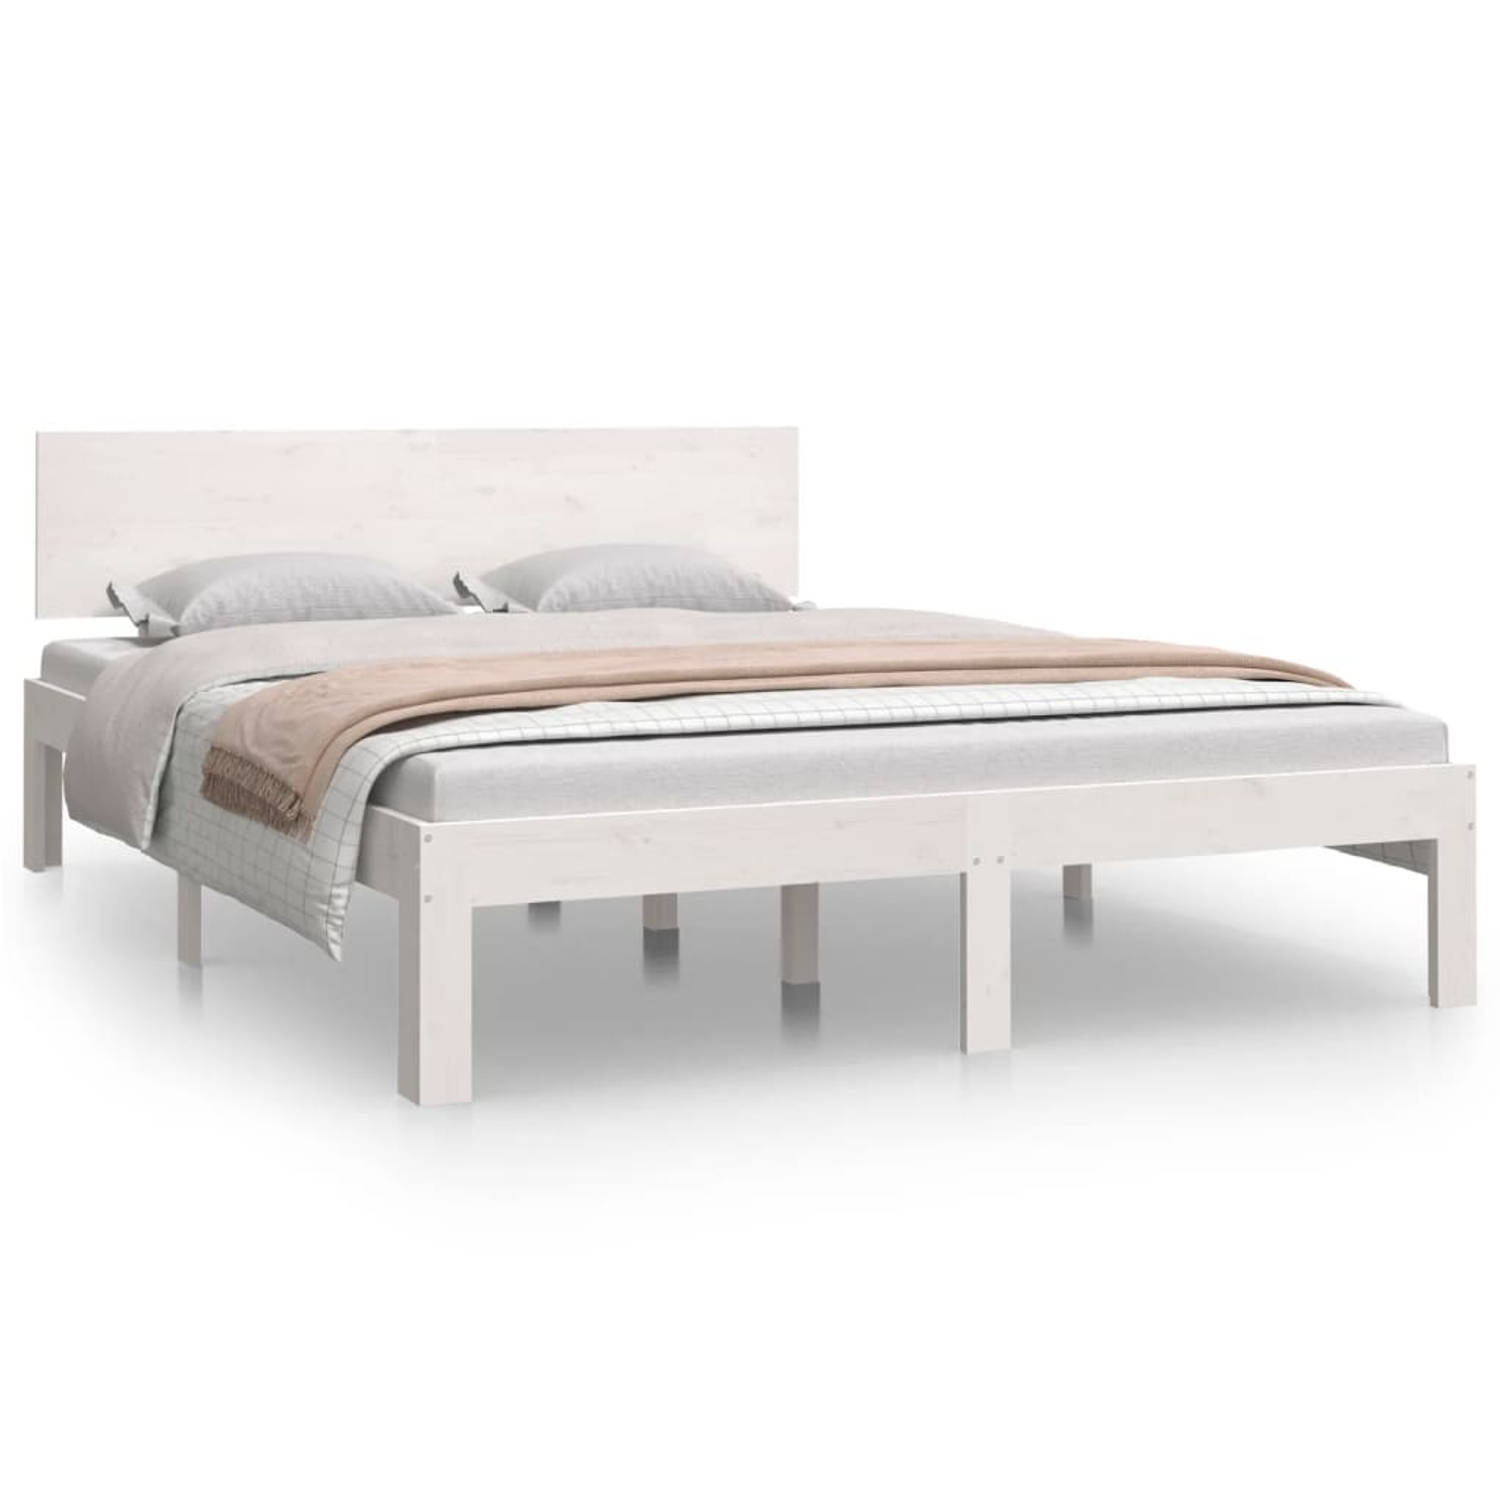 The Living Store Bedframe massief grenenhout wit 135x190 cm Double - Bed